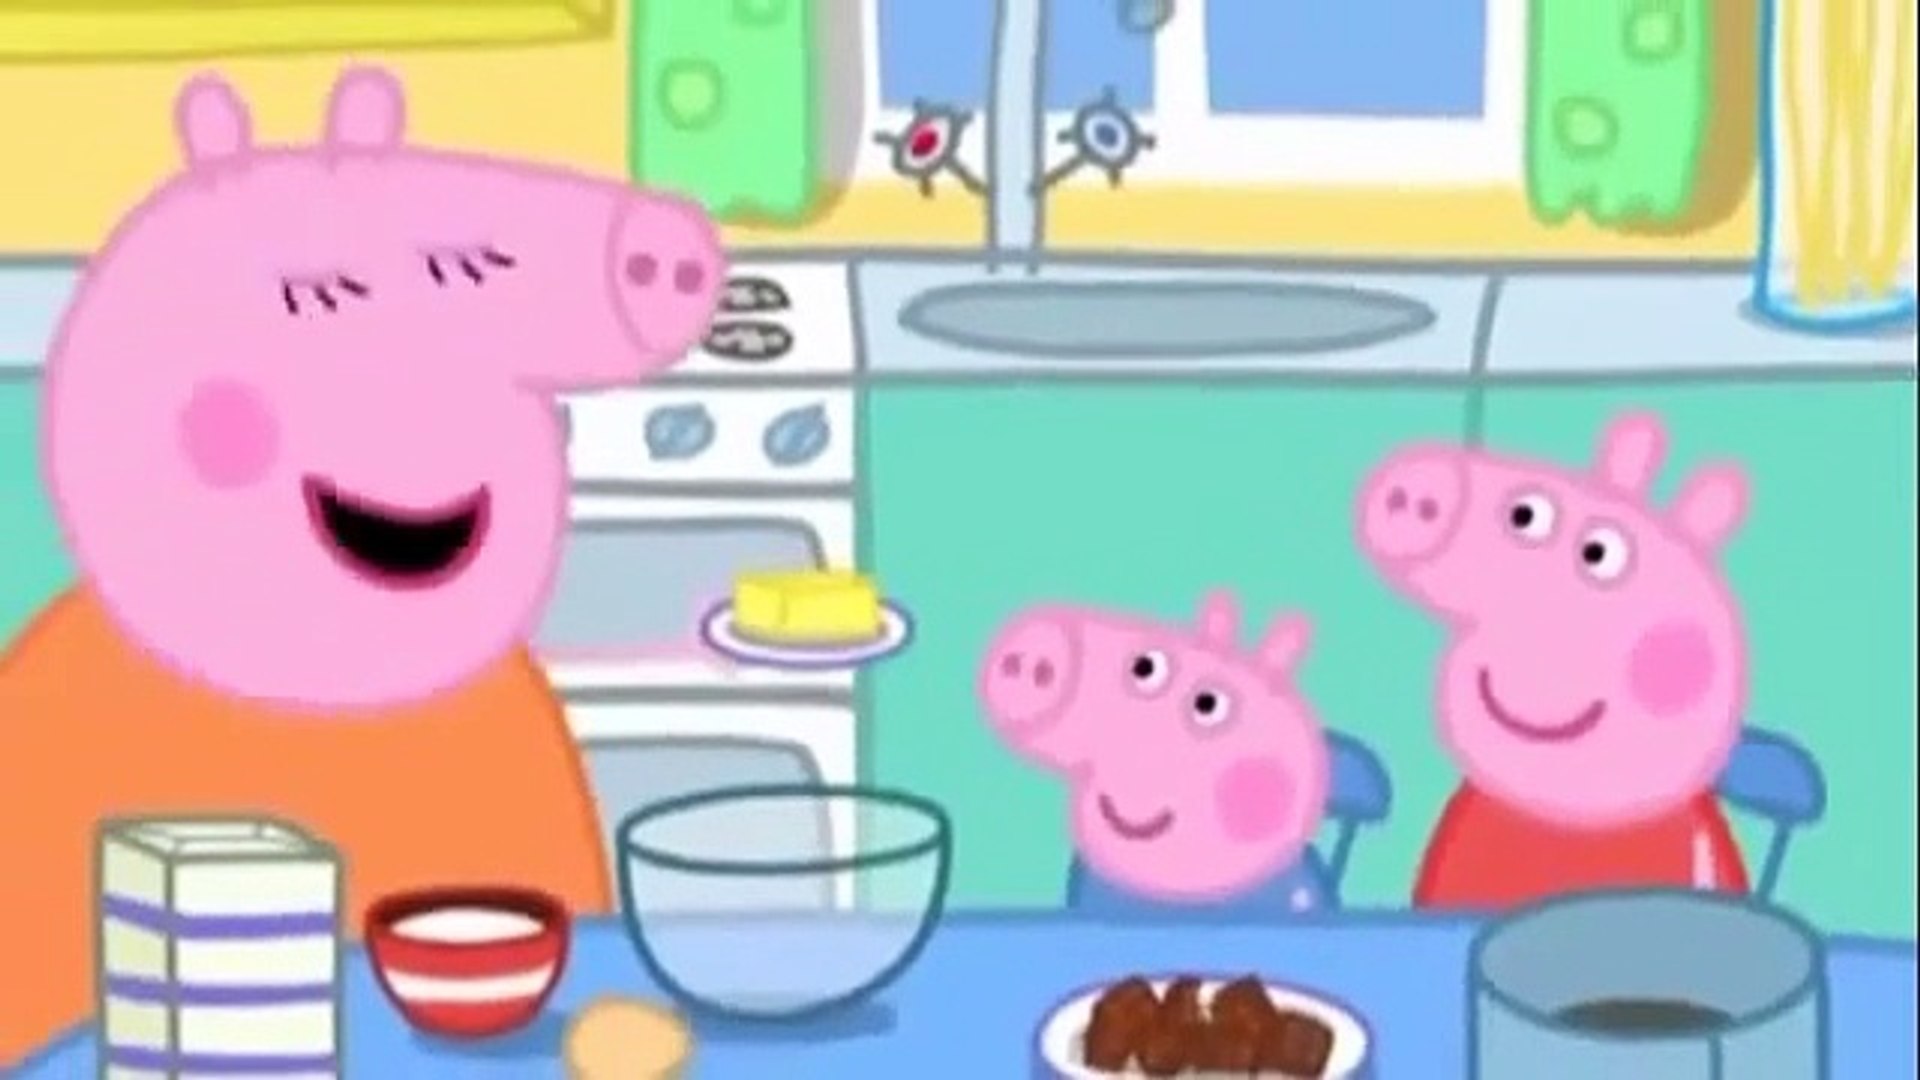 PEPPA PIG IN SICILIANO [PEPPA A POCCA EP 2] - video Dailymotion